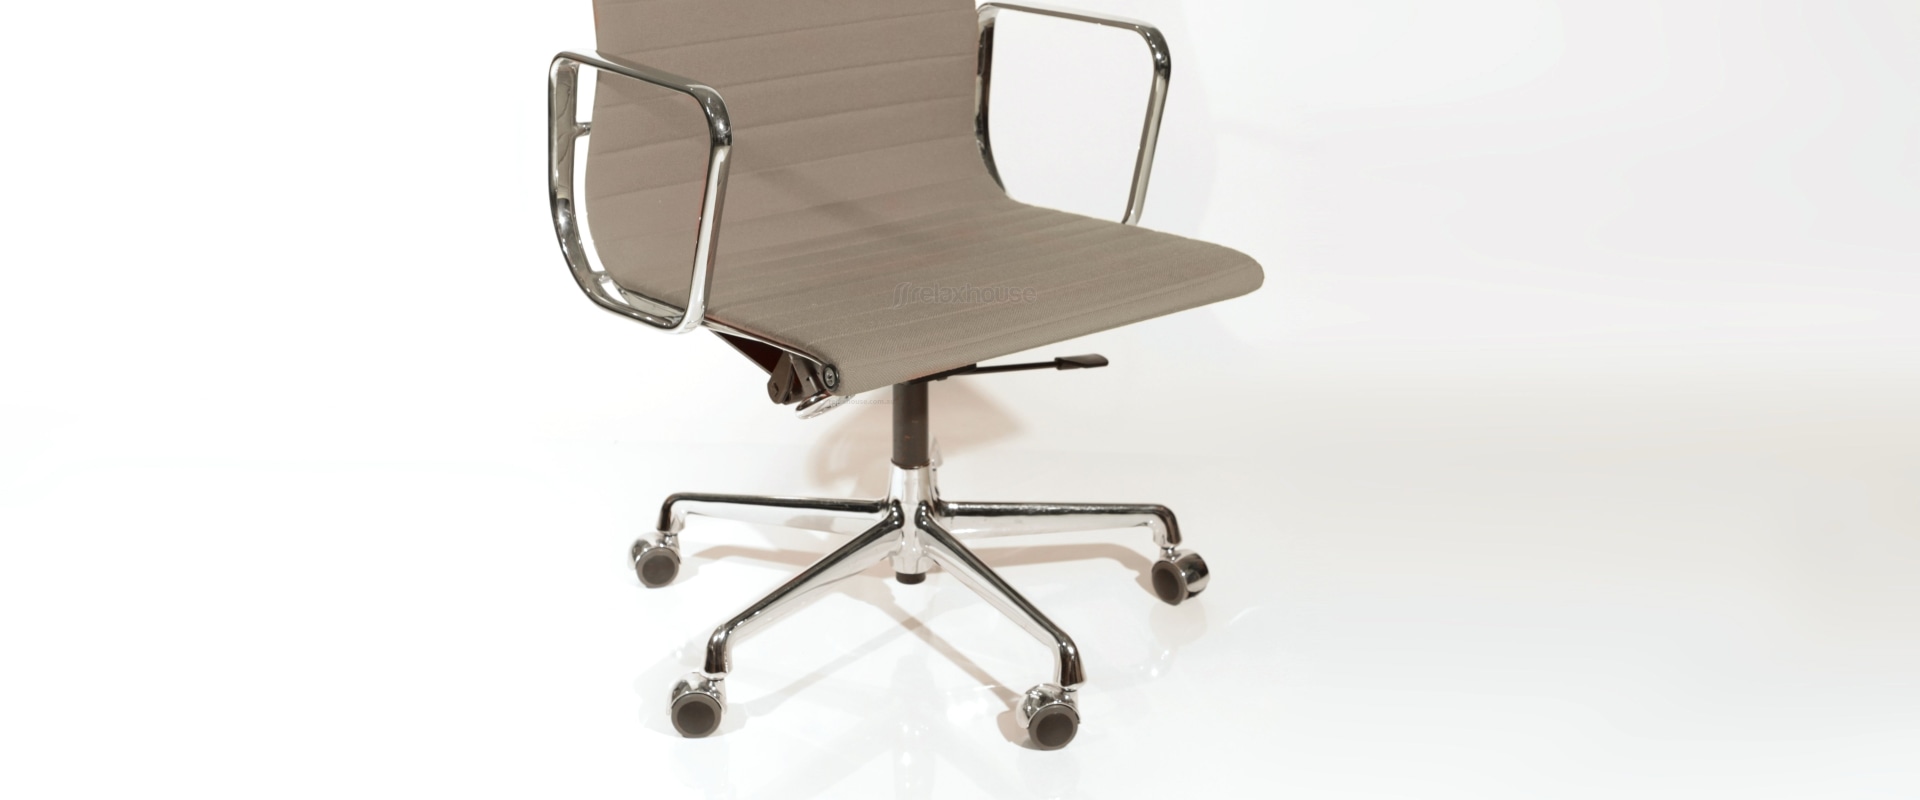 Everything You Need to Know About Eames Office Chair Replica Accessories